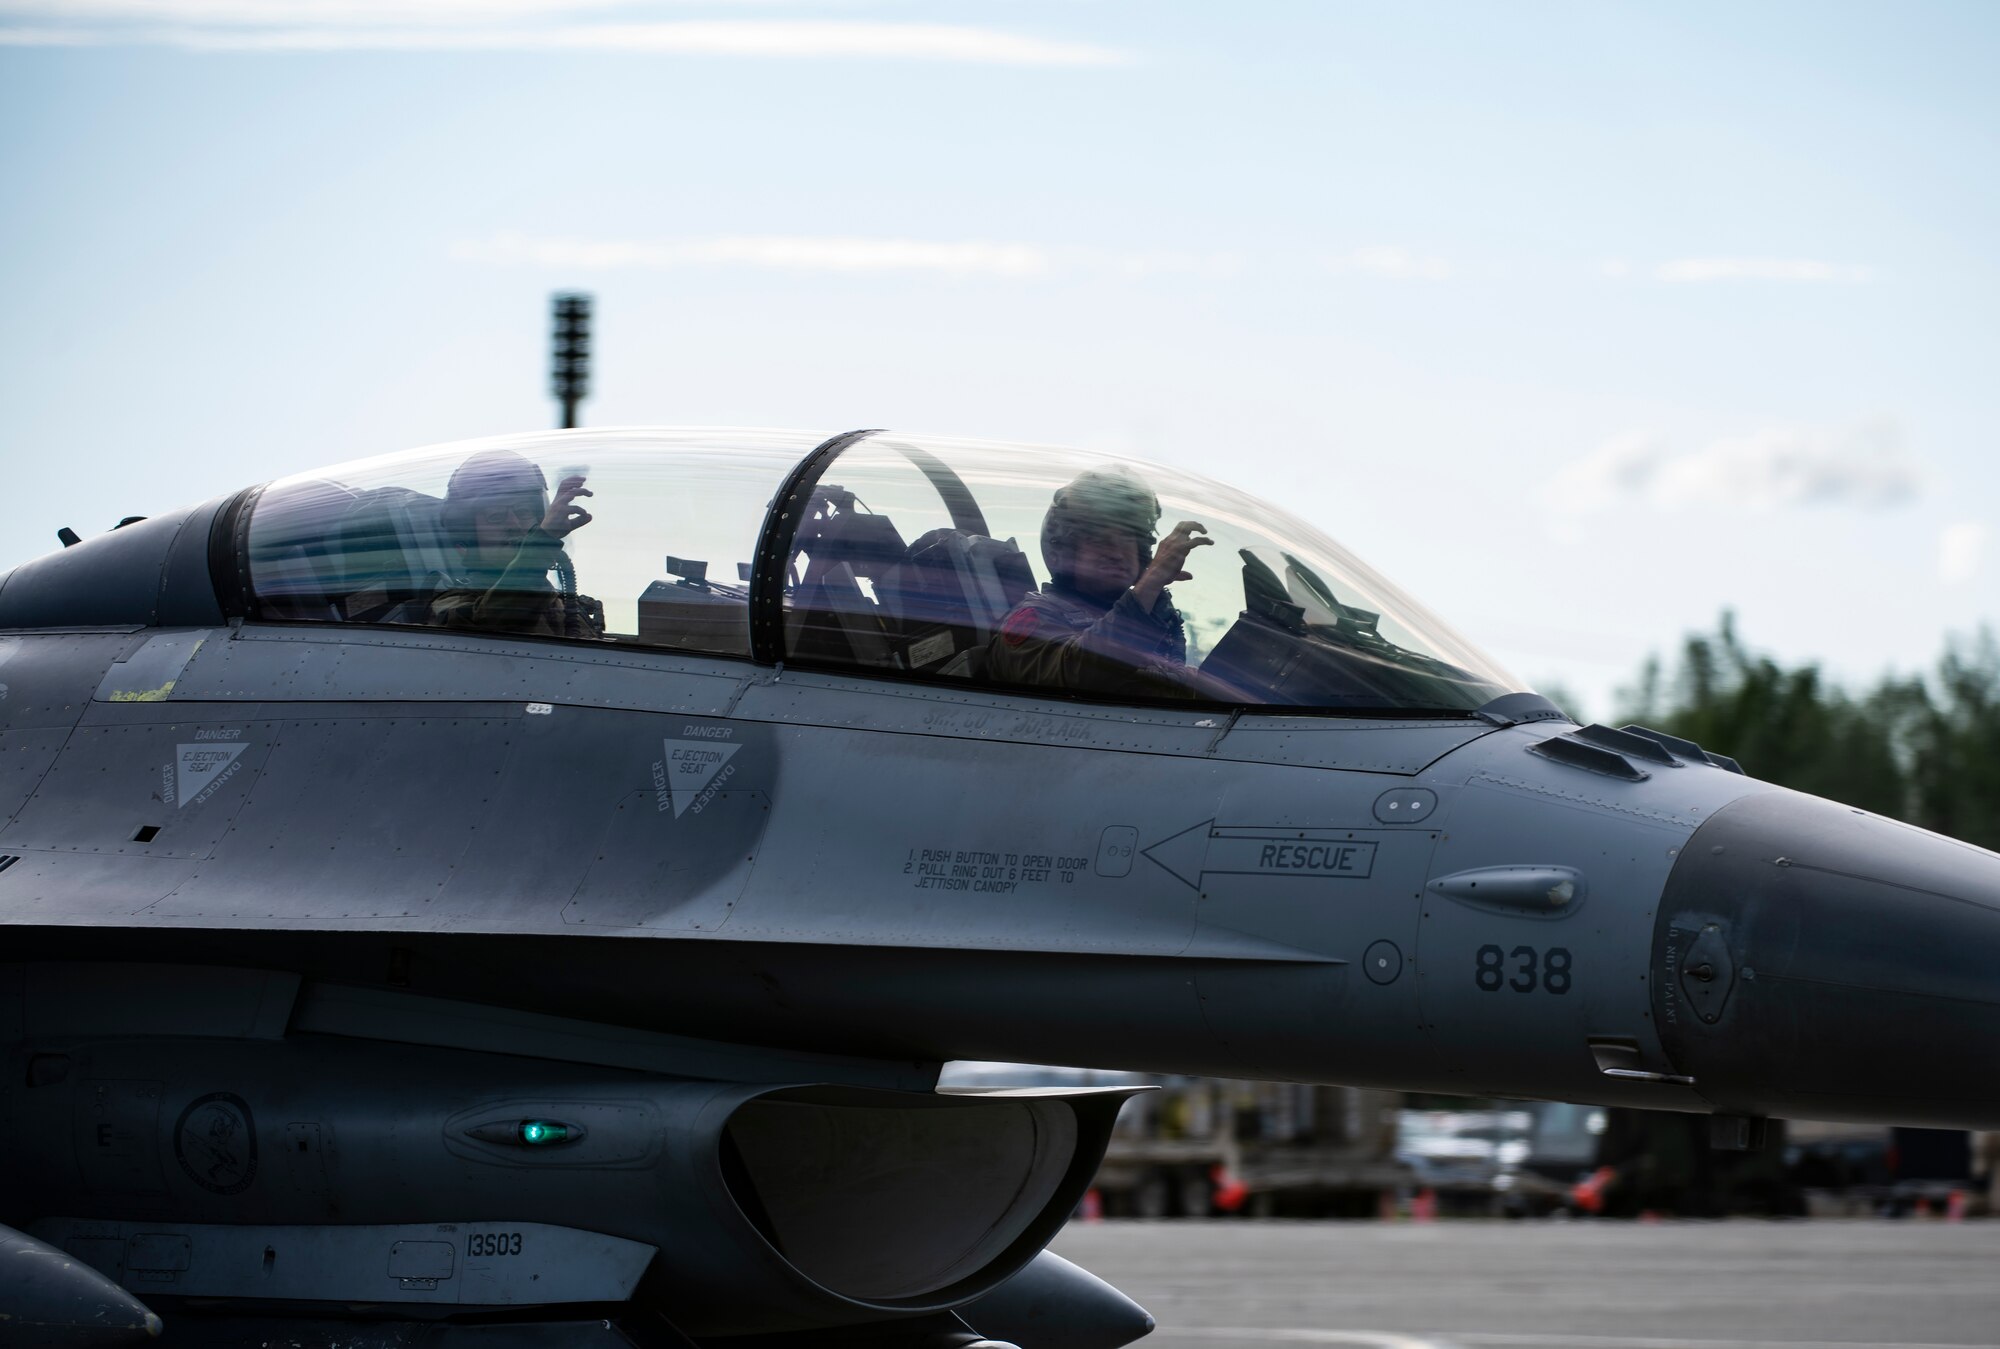 An F-16 Fighting Falcon from the 13th Fighter Squadron, Misawa Air Base, Japan, taxis at Eielson Air Force Base, Alaska, June 10, 2019. The 13th FS is participating in Exercise Red Flag-Alaska 19-2, a large-scale training exercise, with units and allied nation’s air forces from around the Pacific. (U.S. Air Force photo by Senior Airman Stefan Alvarez)